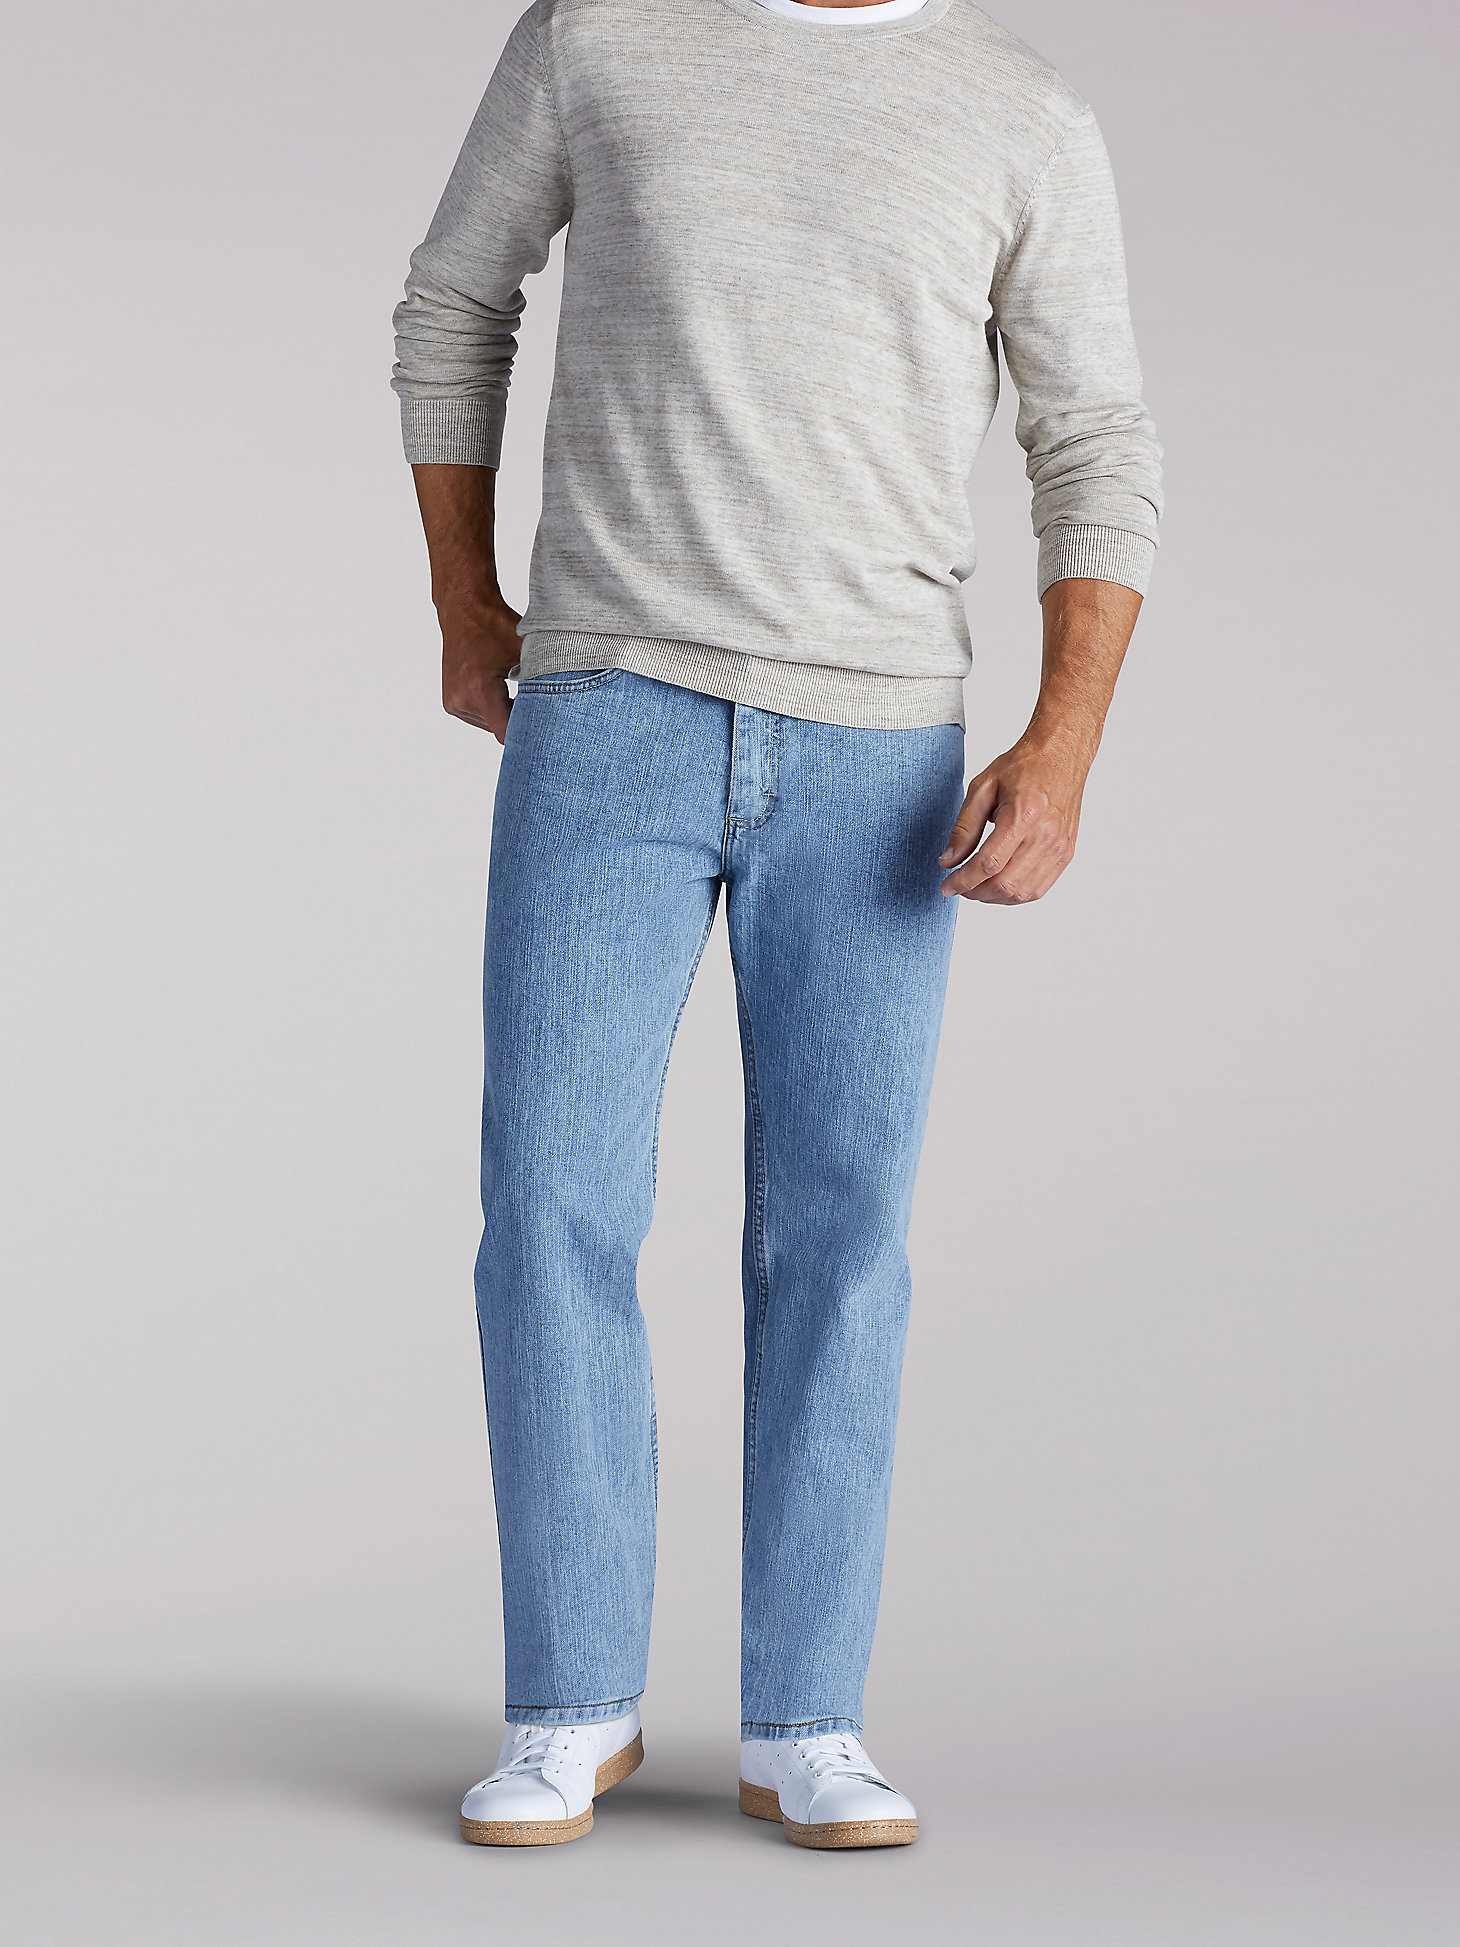 LEE Mens Relaxed Fit Straight Leg Jean